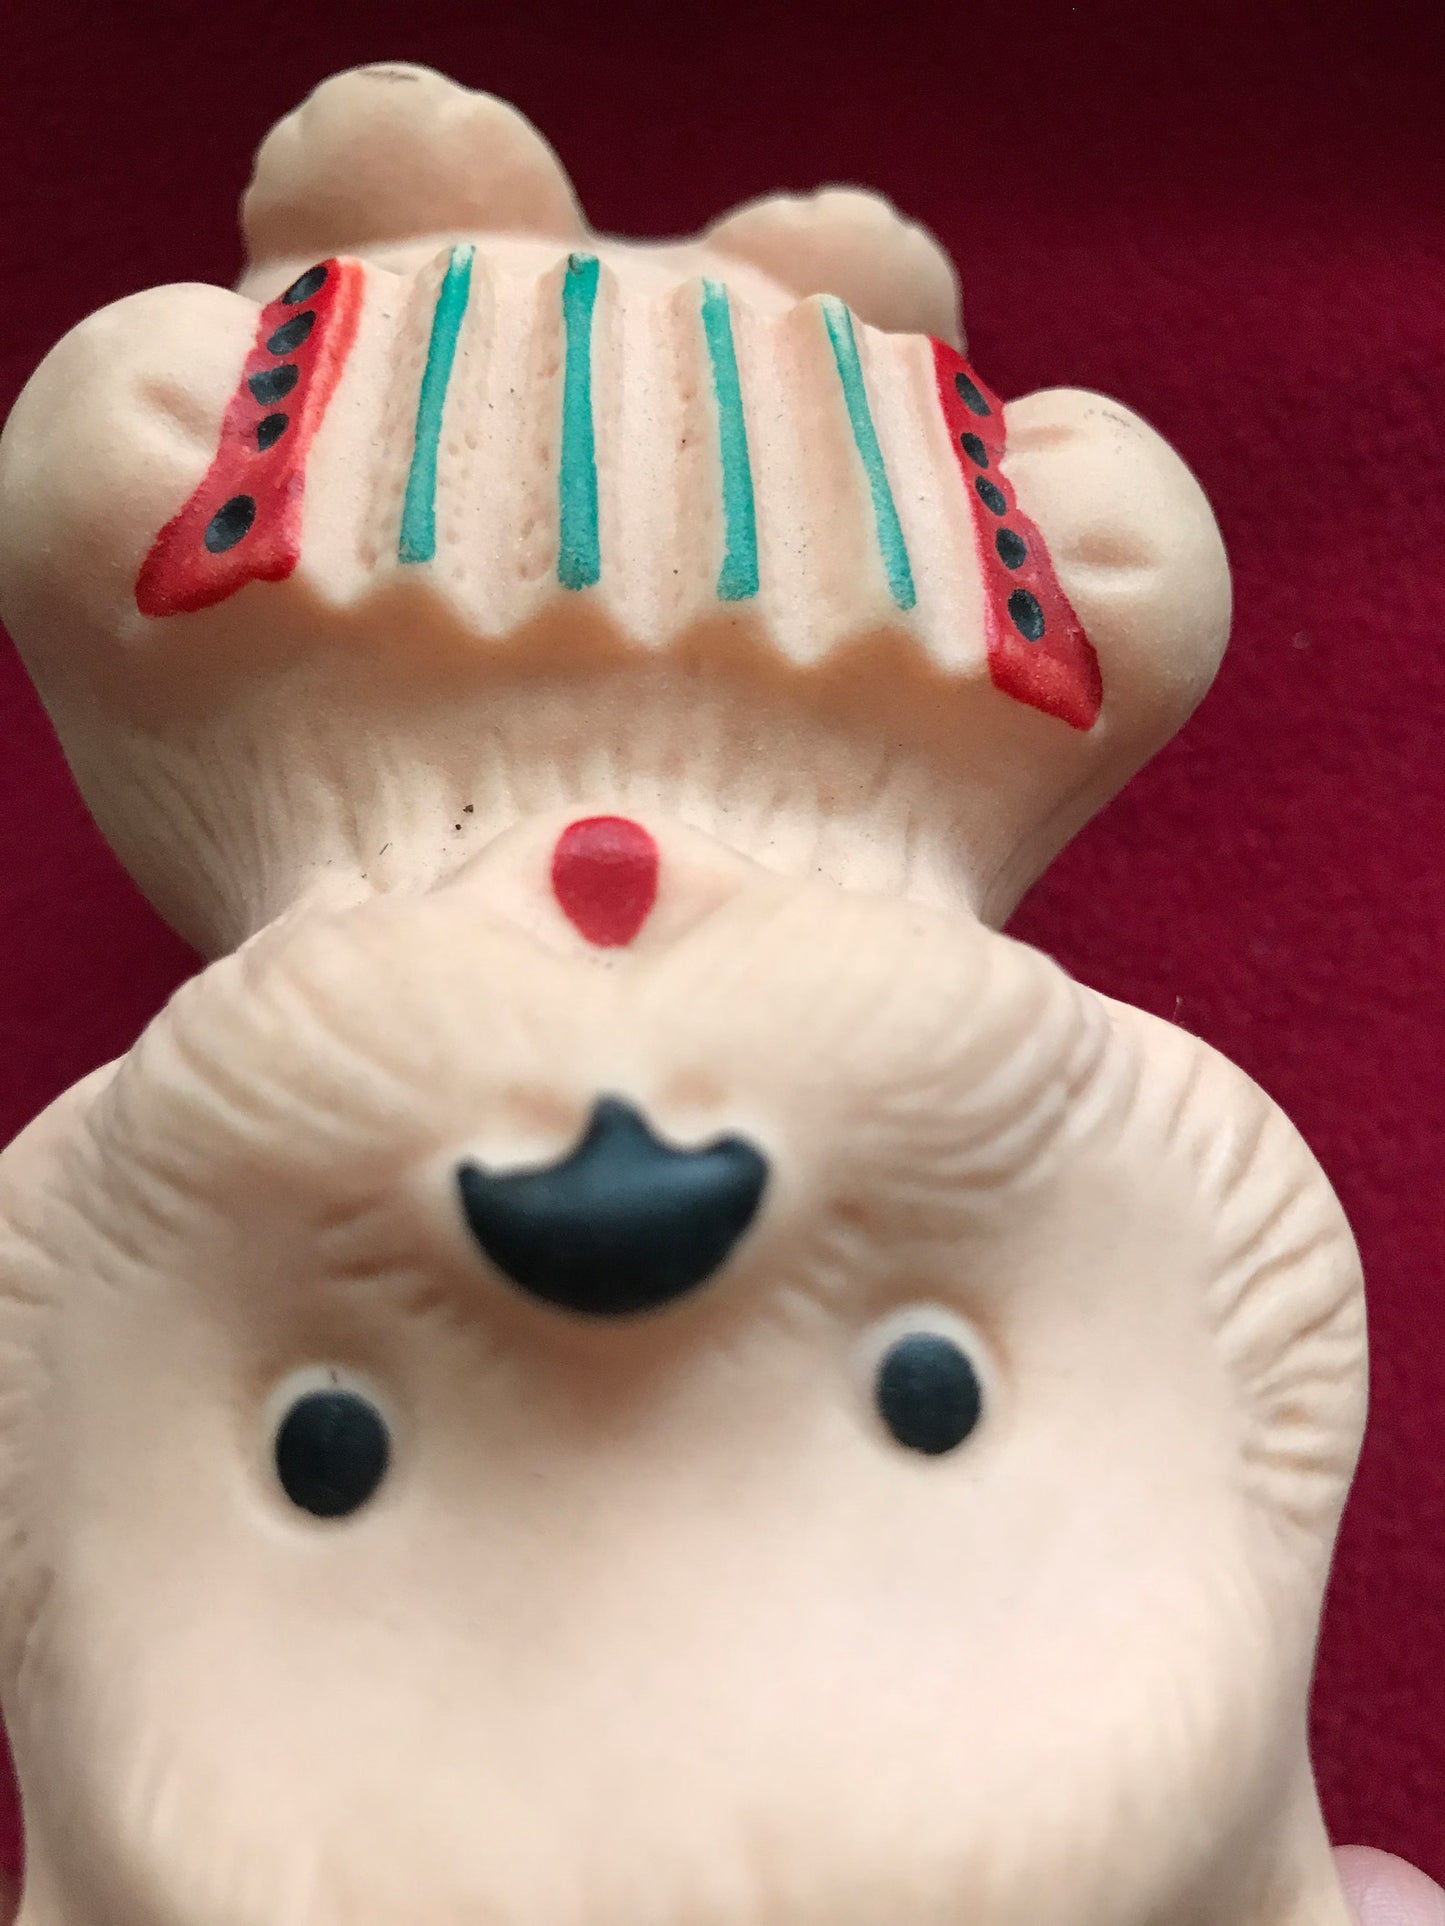 Rare find! Vintage 1970s rubber toy - CAT playing Garmon Karmoshka - Made in Soviet Union - Lovely USSR retro toy - Collectible vintage toy